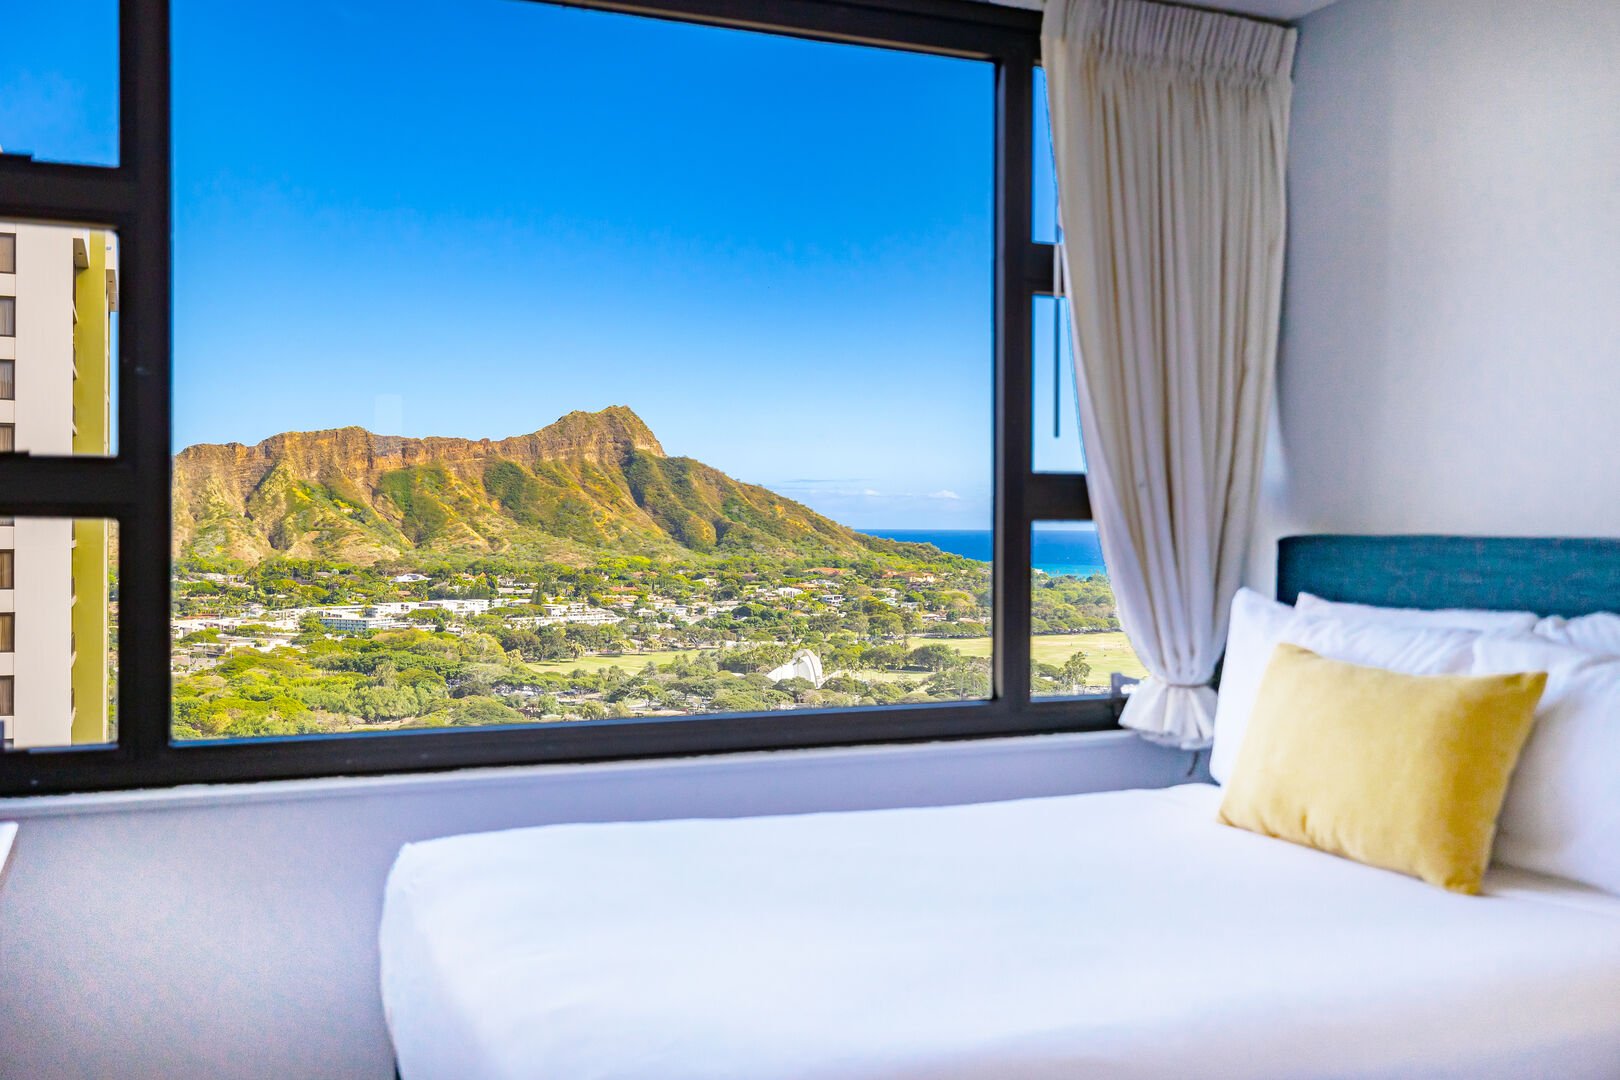 Stunning Diamond Head and ocean views from your bedroom